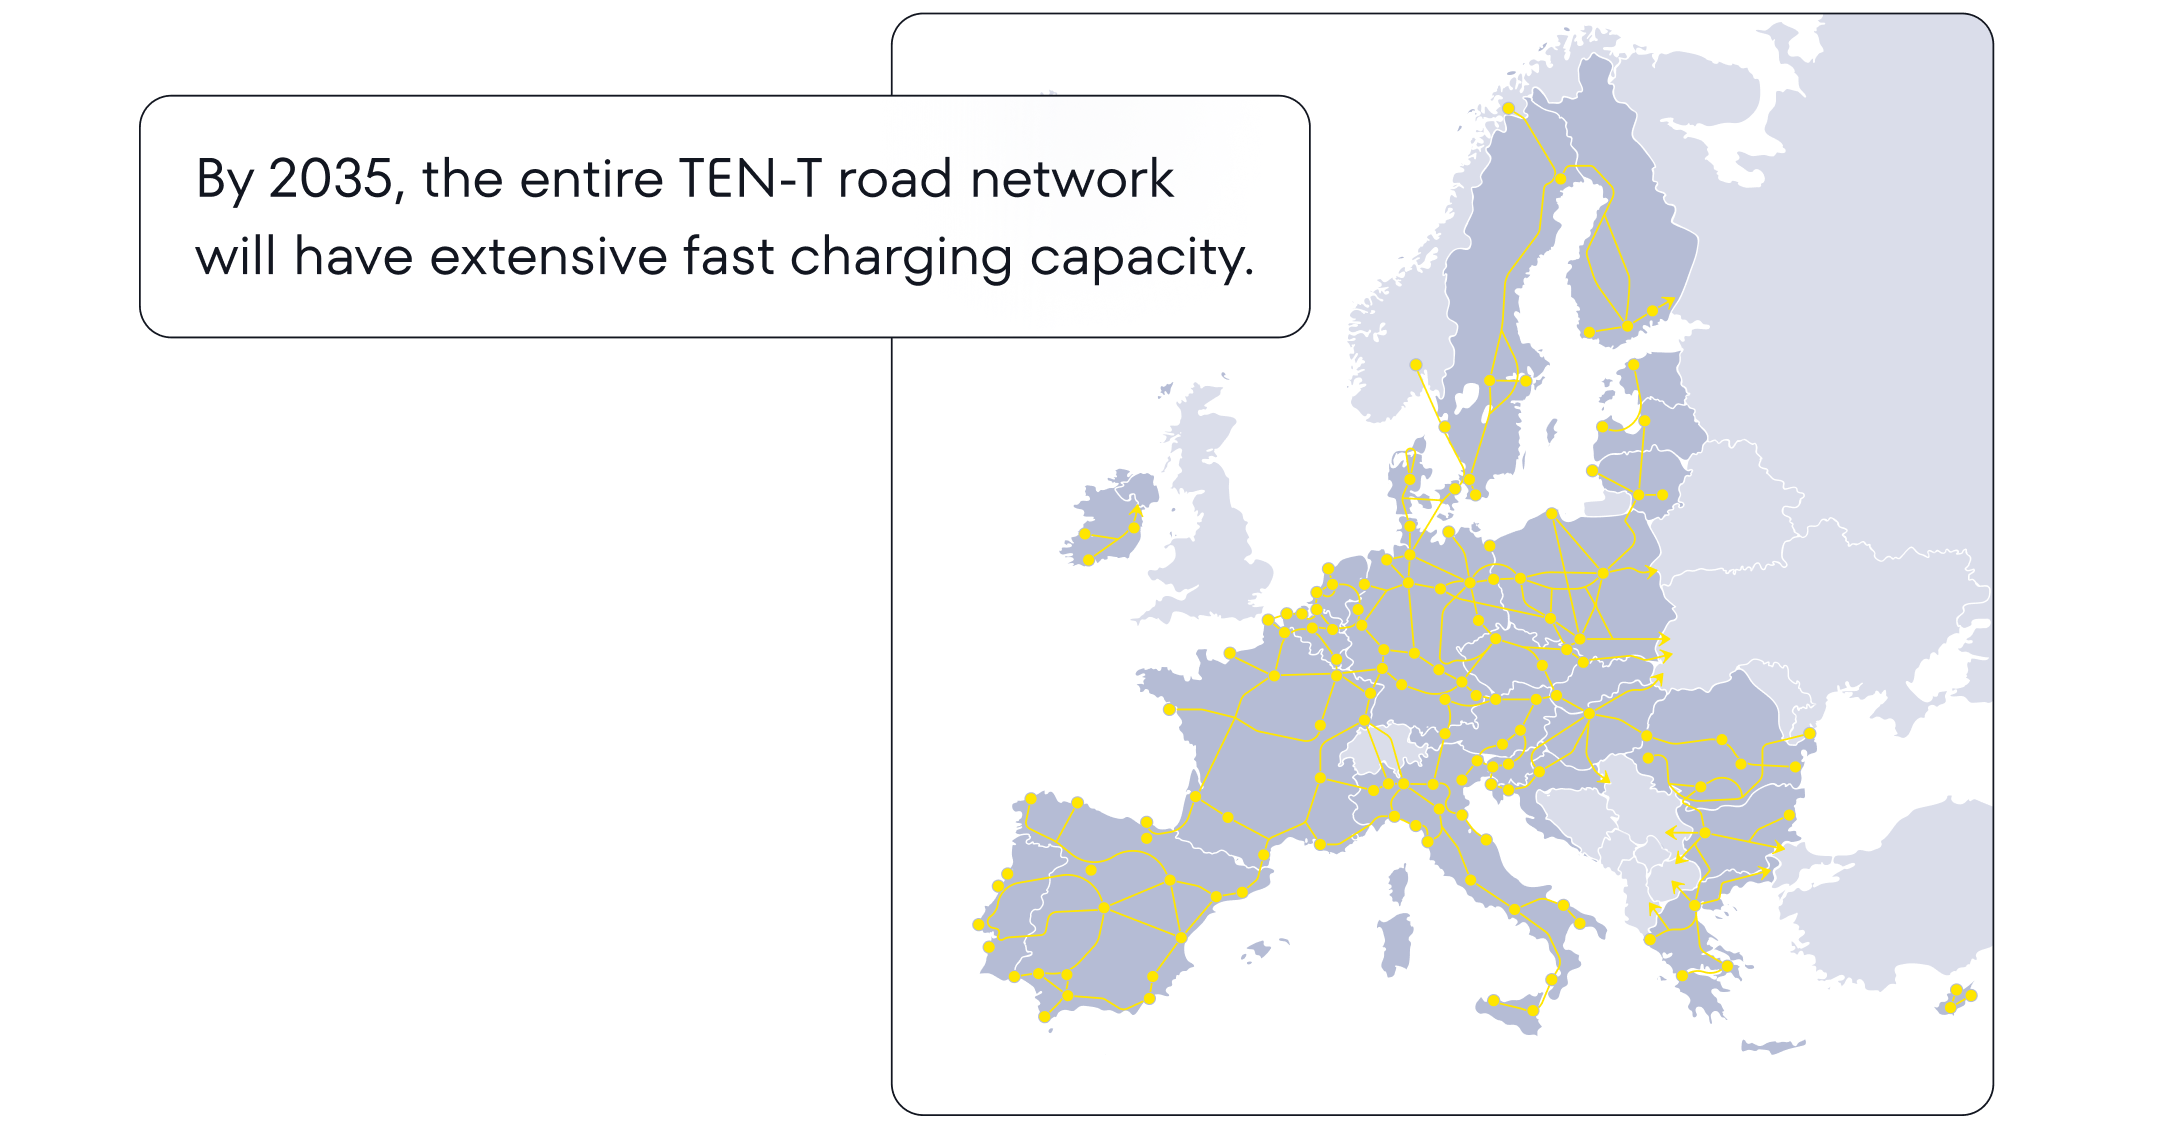 By 2035, the entire TEN-T road network will have extensive fast charging capacity